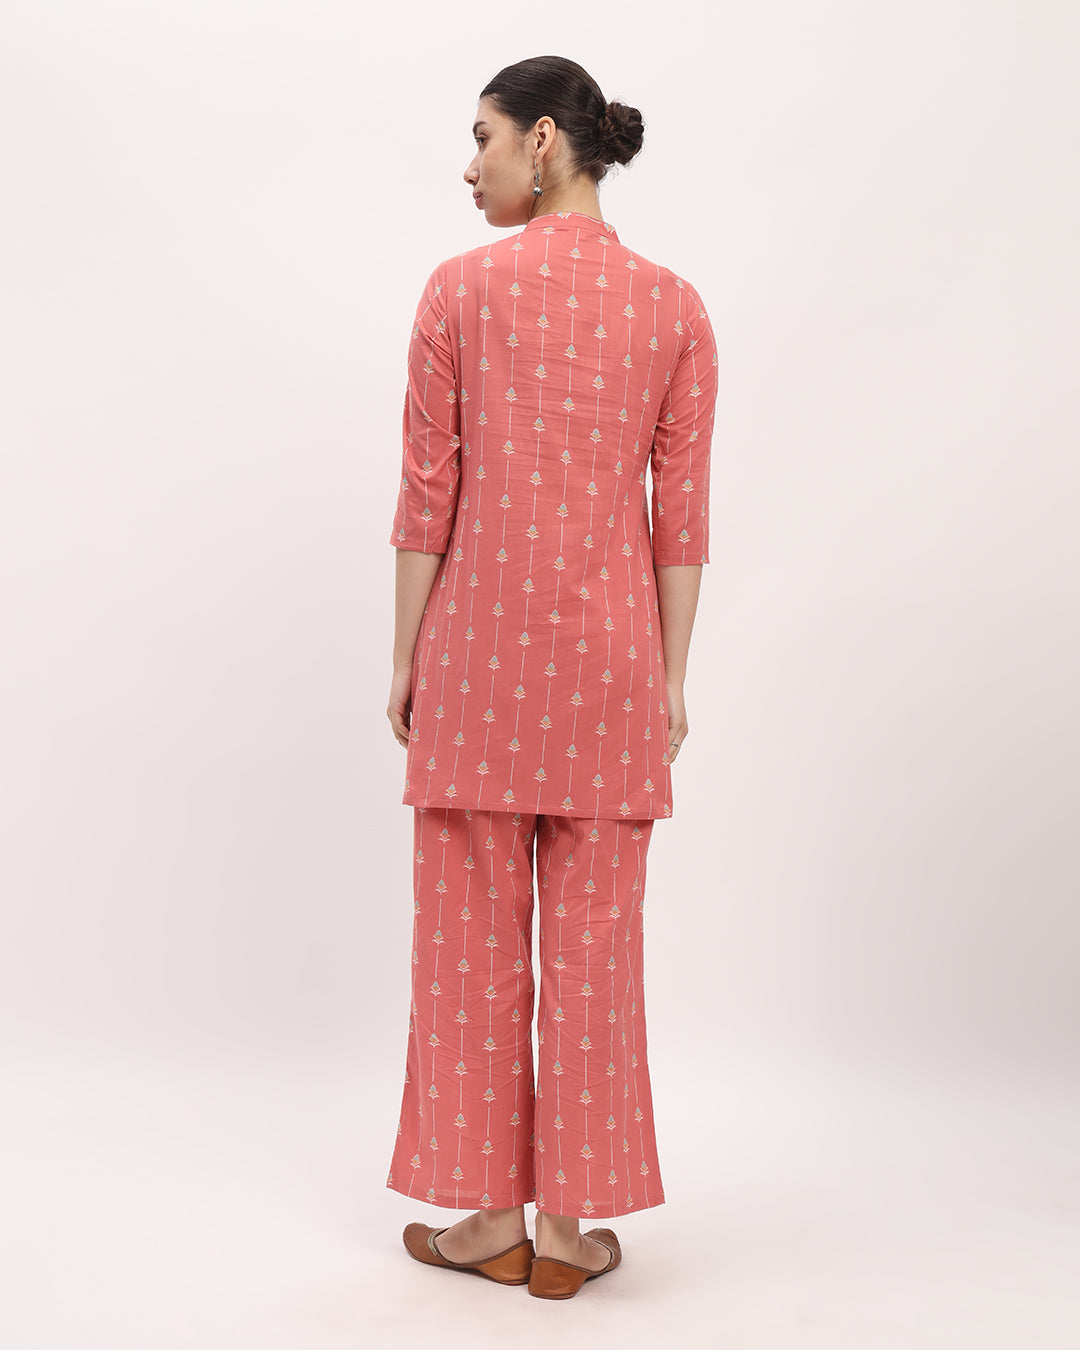 Combo: Green Moonlit Jasmine & English Floral Track Mid Length Printed Kurta (Without Bottoms)